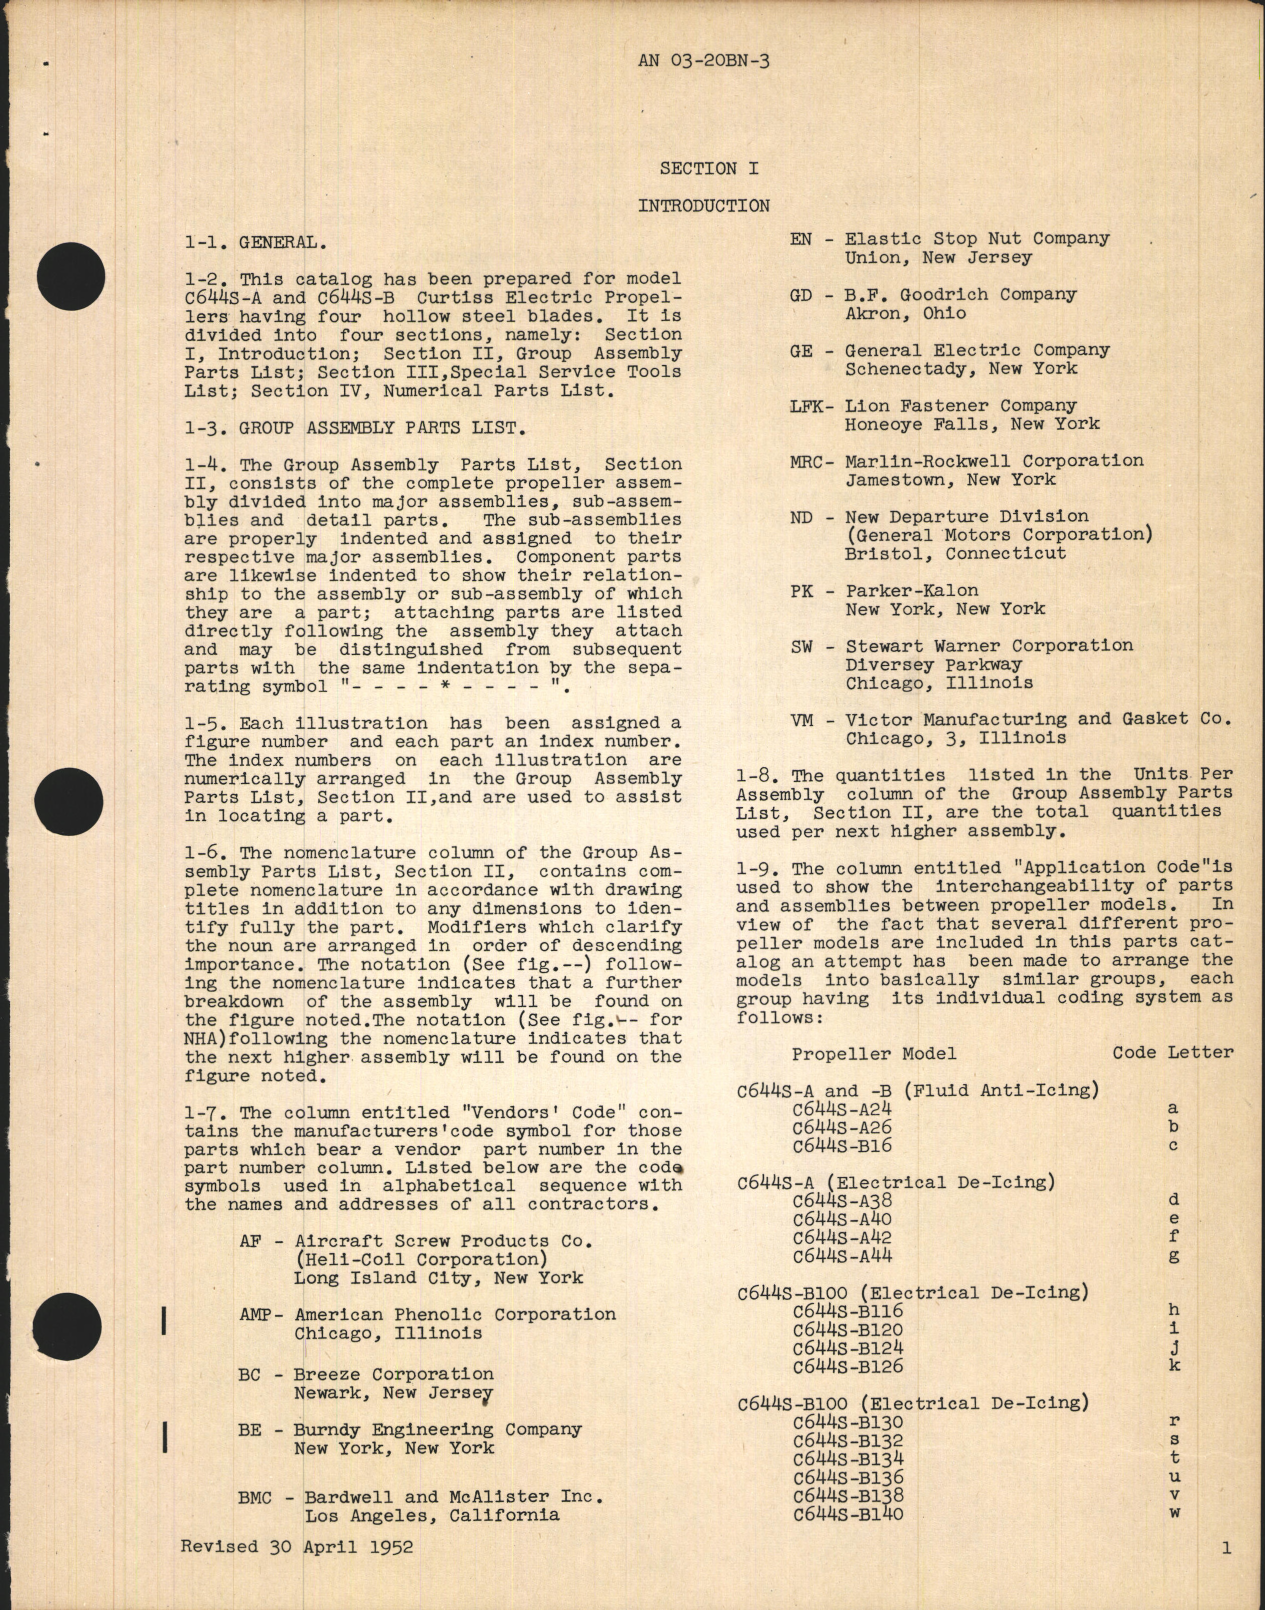 Sample page 5 from AirCorps Library document: Parts Catalog for Curtiss Electric Propeller Models C644S-A and C644S-B